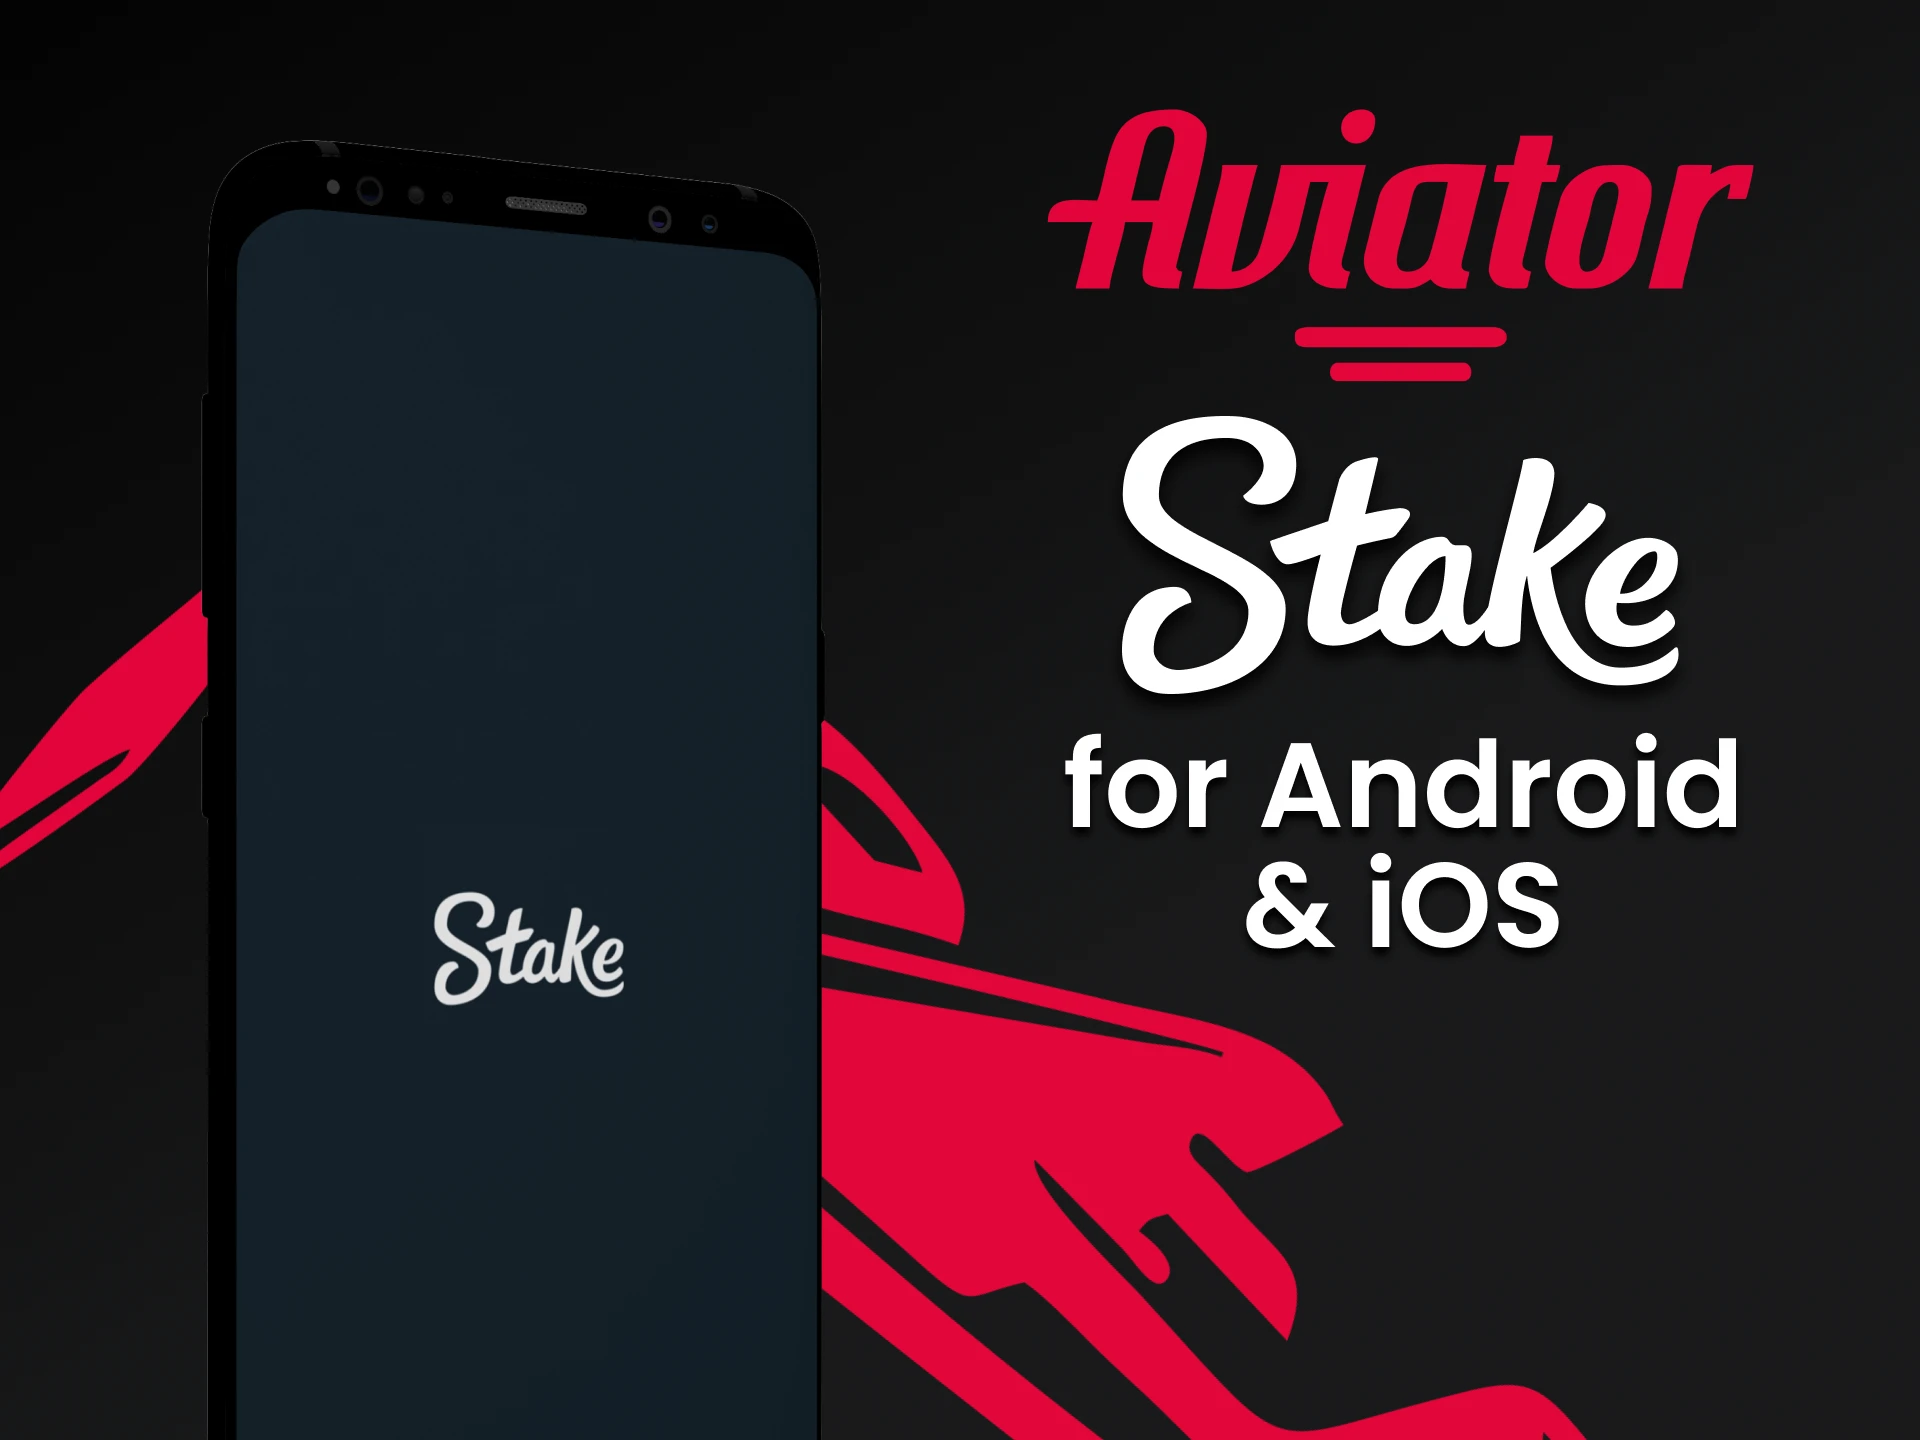 To play Aviator you can use the Stake app.